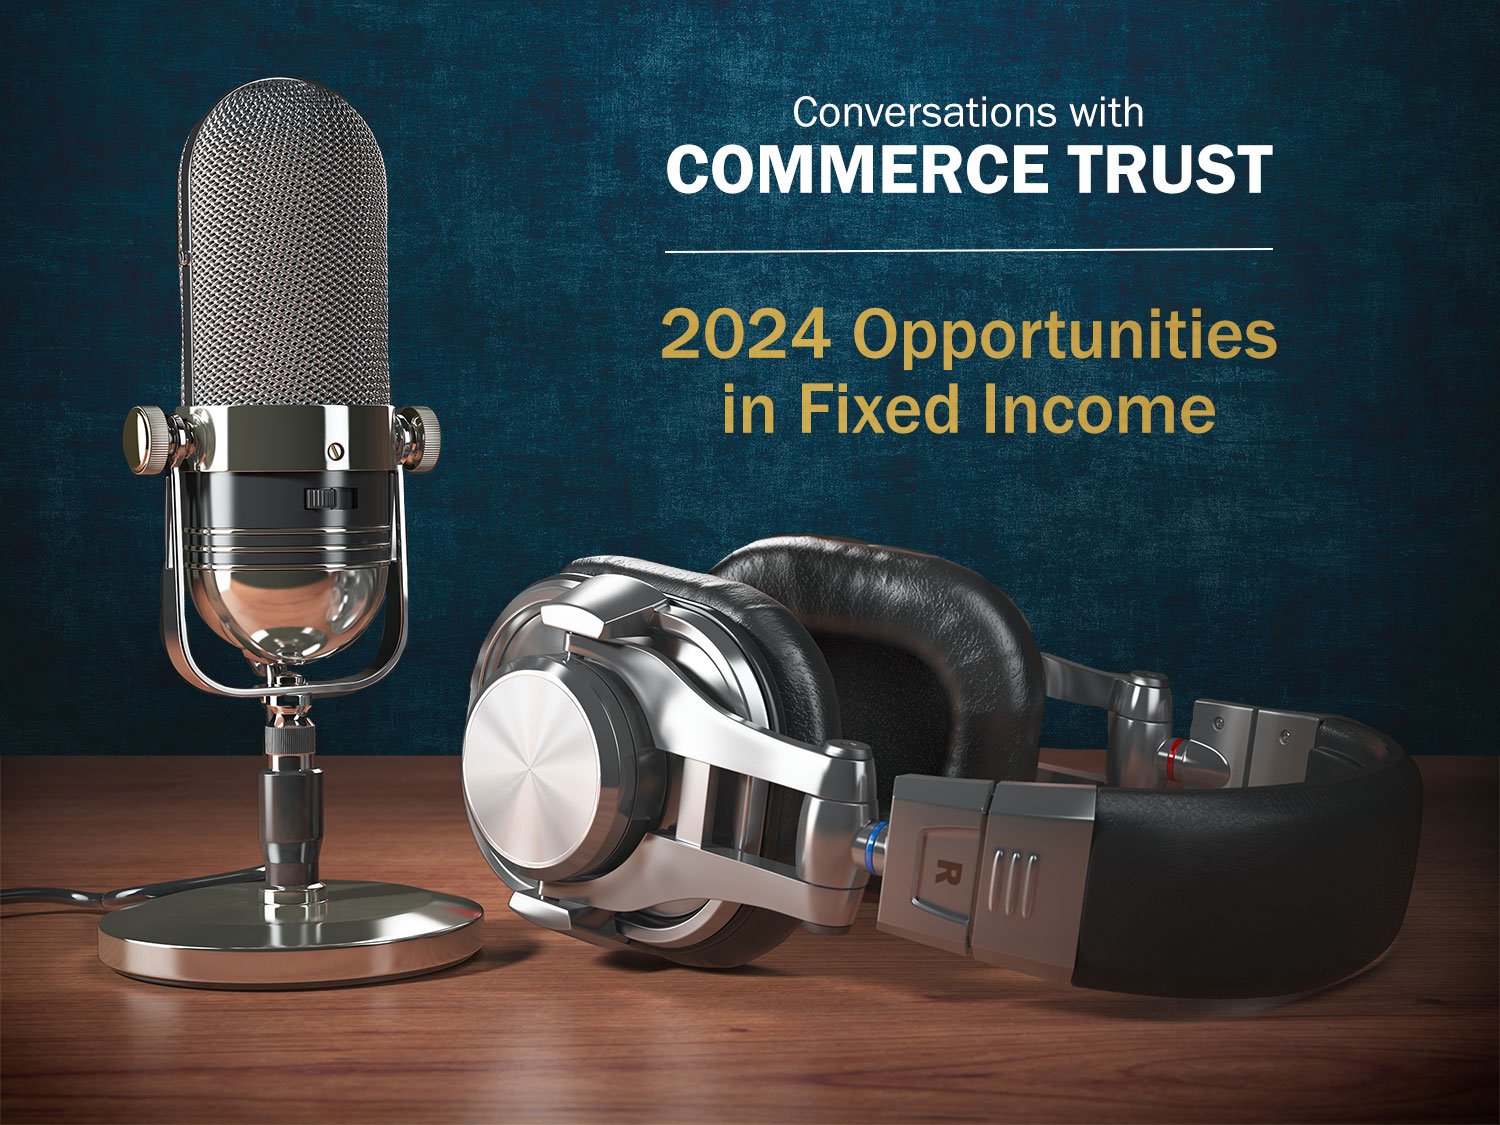 Podcast microphone headphones wood table navy background Conversations With Commerce Trust 2024 Opportunities in Fixed Income